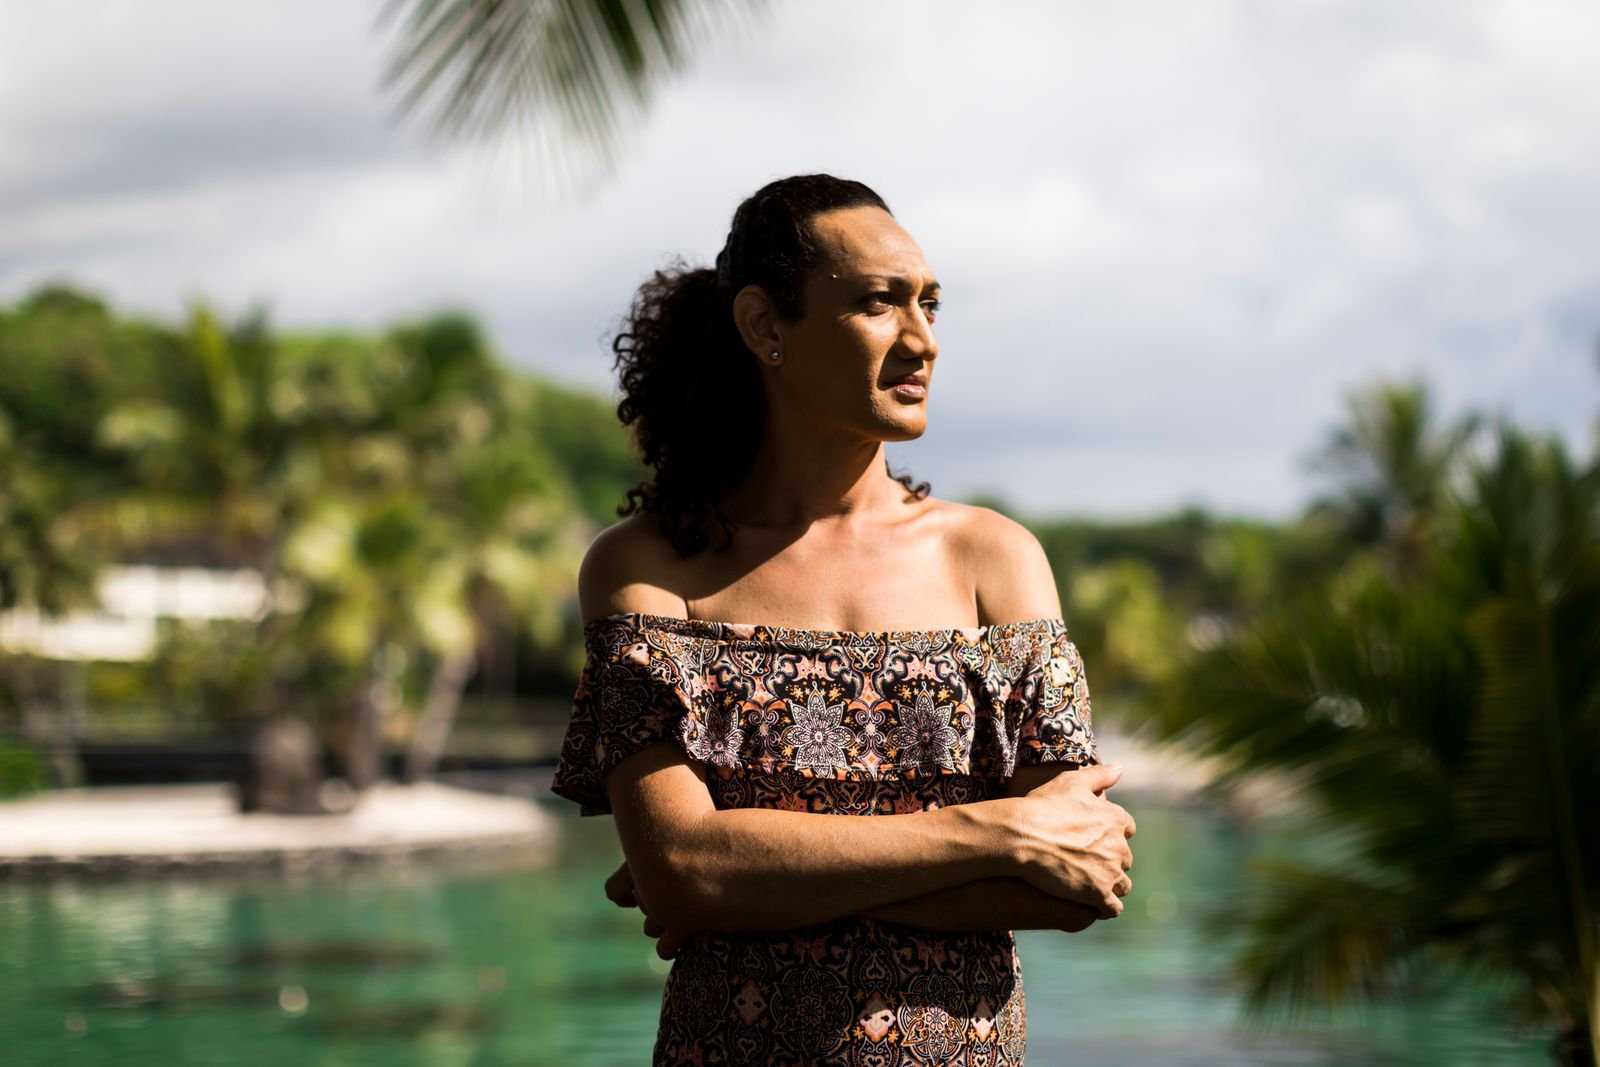 © Sebastien Lebegue - Image from the Transgender idendity in the Pacific area. photography project